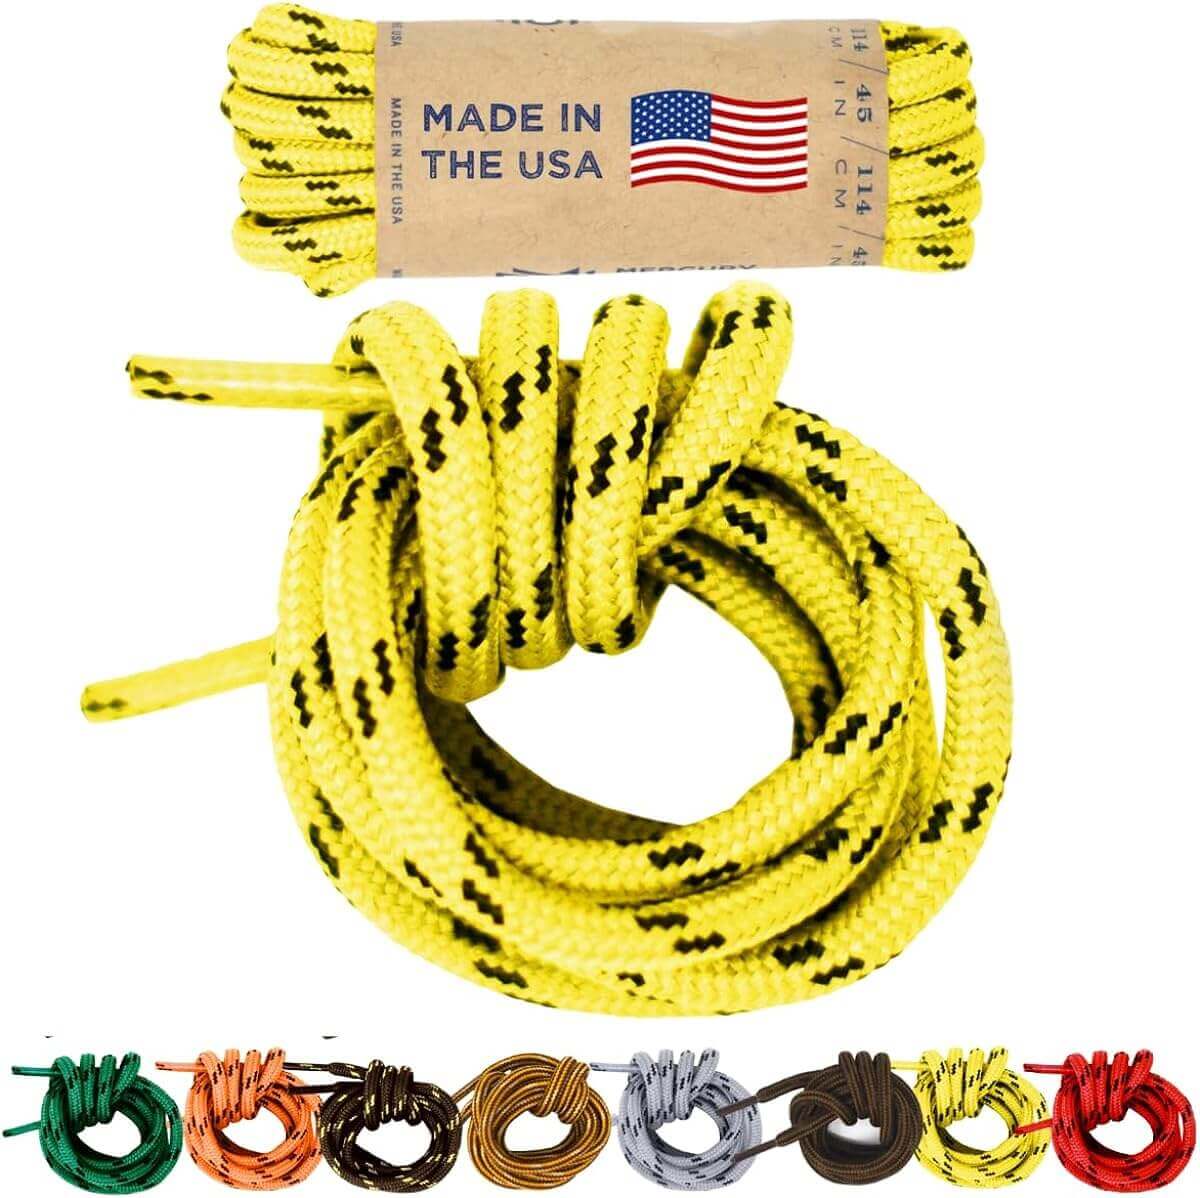 Shop The Latest >Honey Badger Boot Laces Heavy Duty w/Kevlar - Made in USA > *Only $20.24*> From The Top Brand > *Honey Badgerl* > Shop Now and Get Free Shipping On Orders Over $45.00 >*Shop Earth Foot*